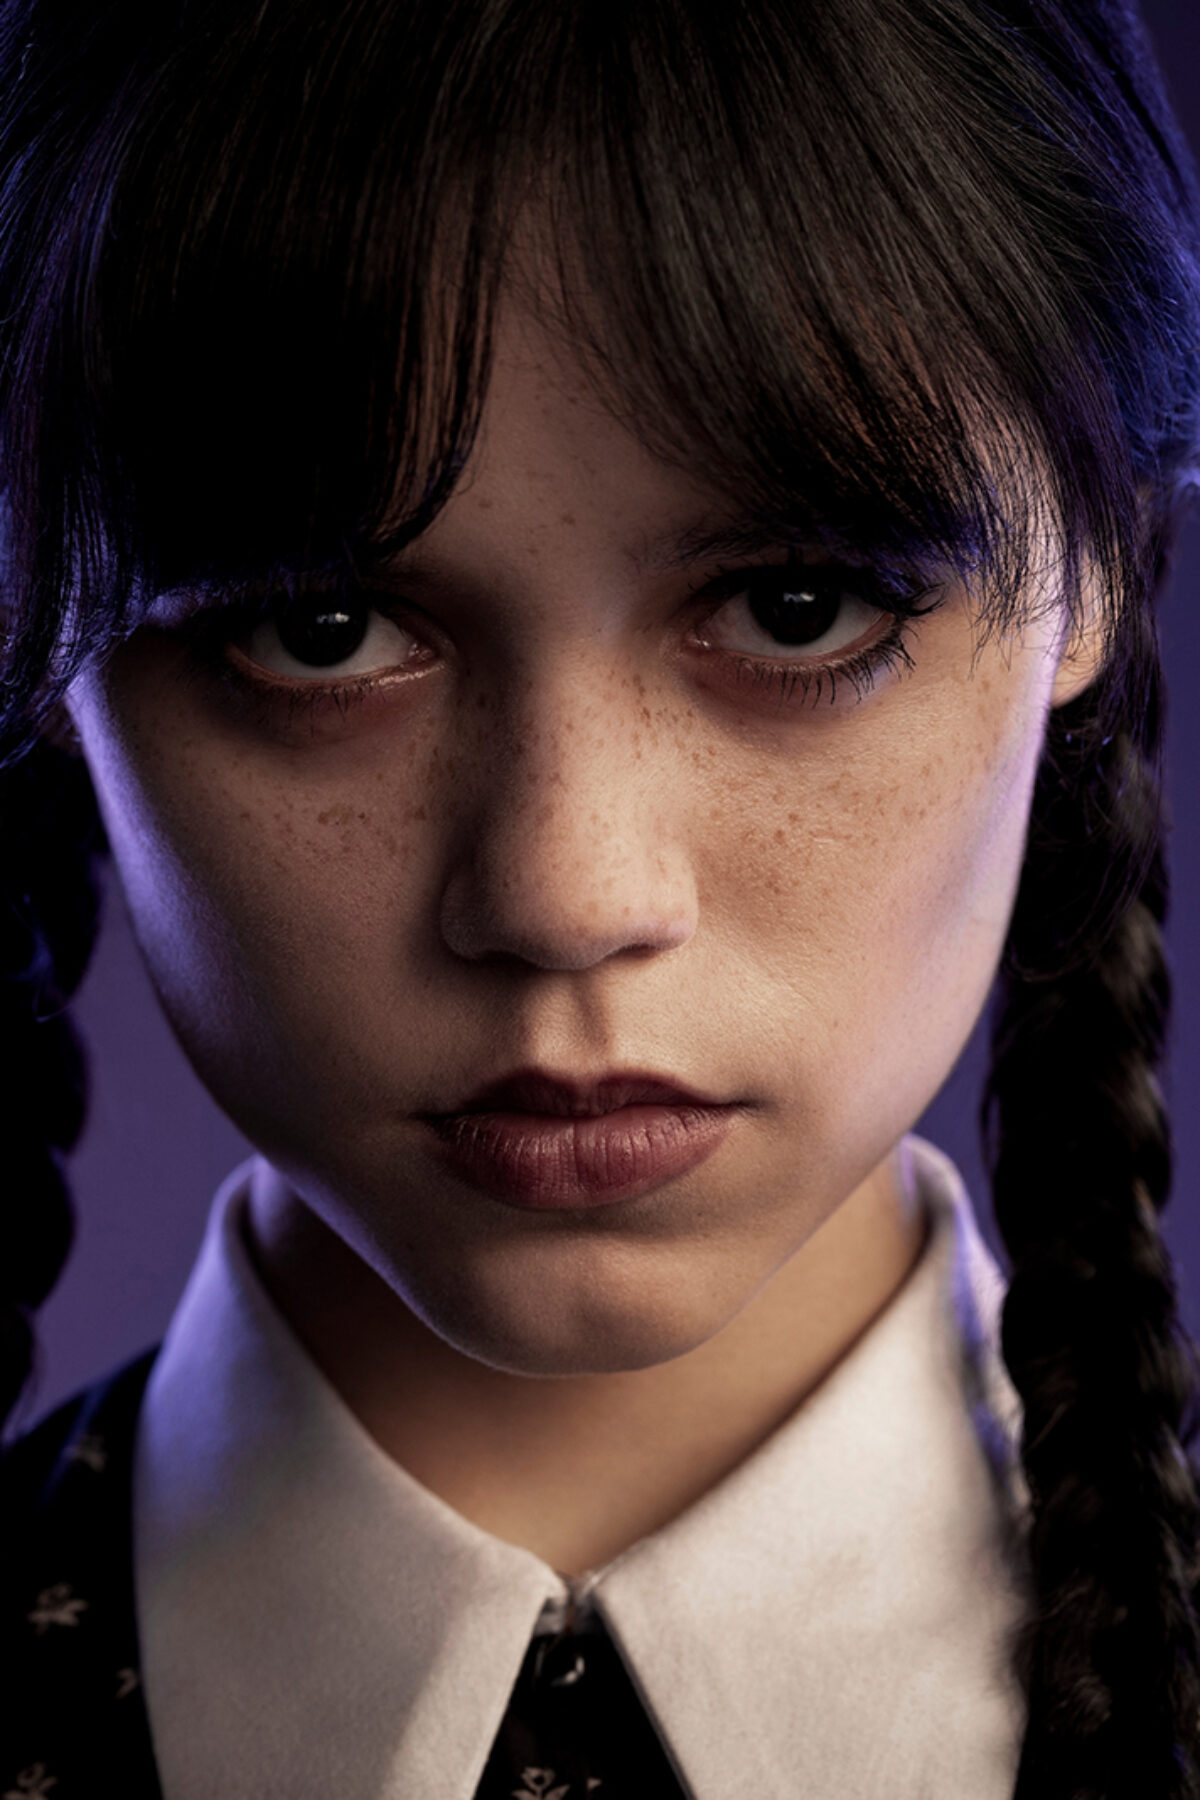 Jenna Ortega as Wednesday Addams in the new Netflix series